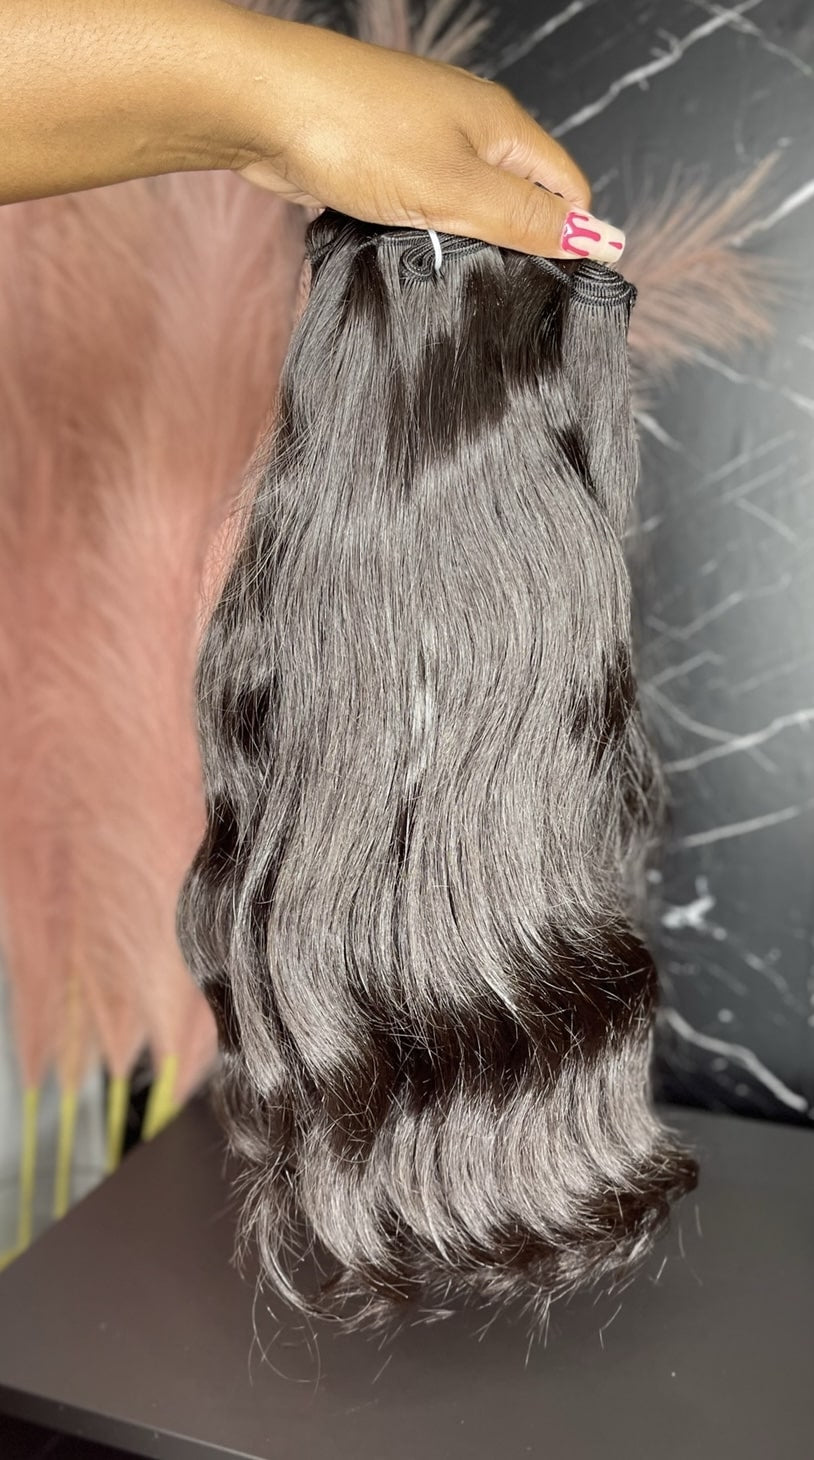 Remeehi Feather Hair Extensions Real Natural Human Hair 100% -Remy